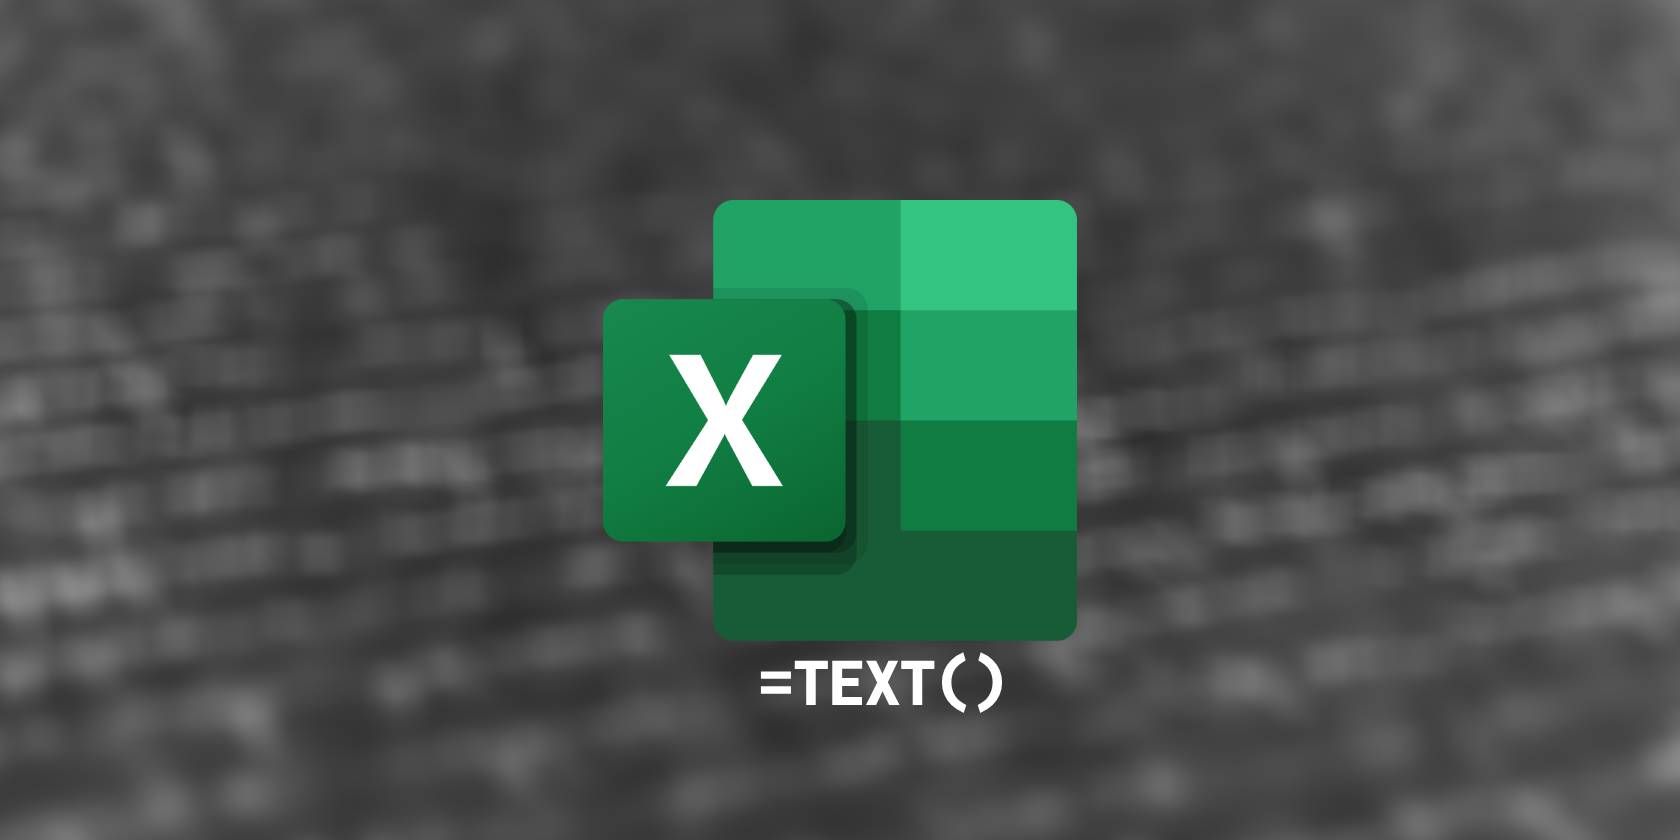 Excel logo with the TEXT function icon under it.